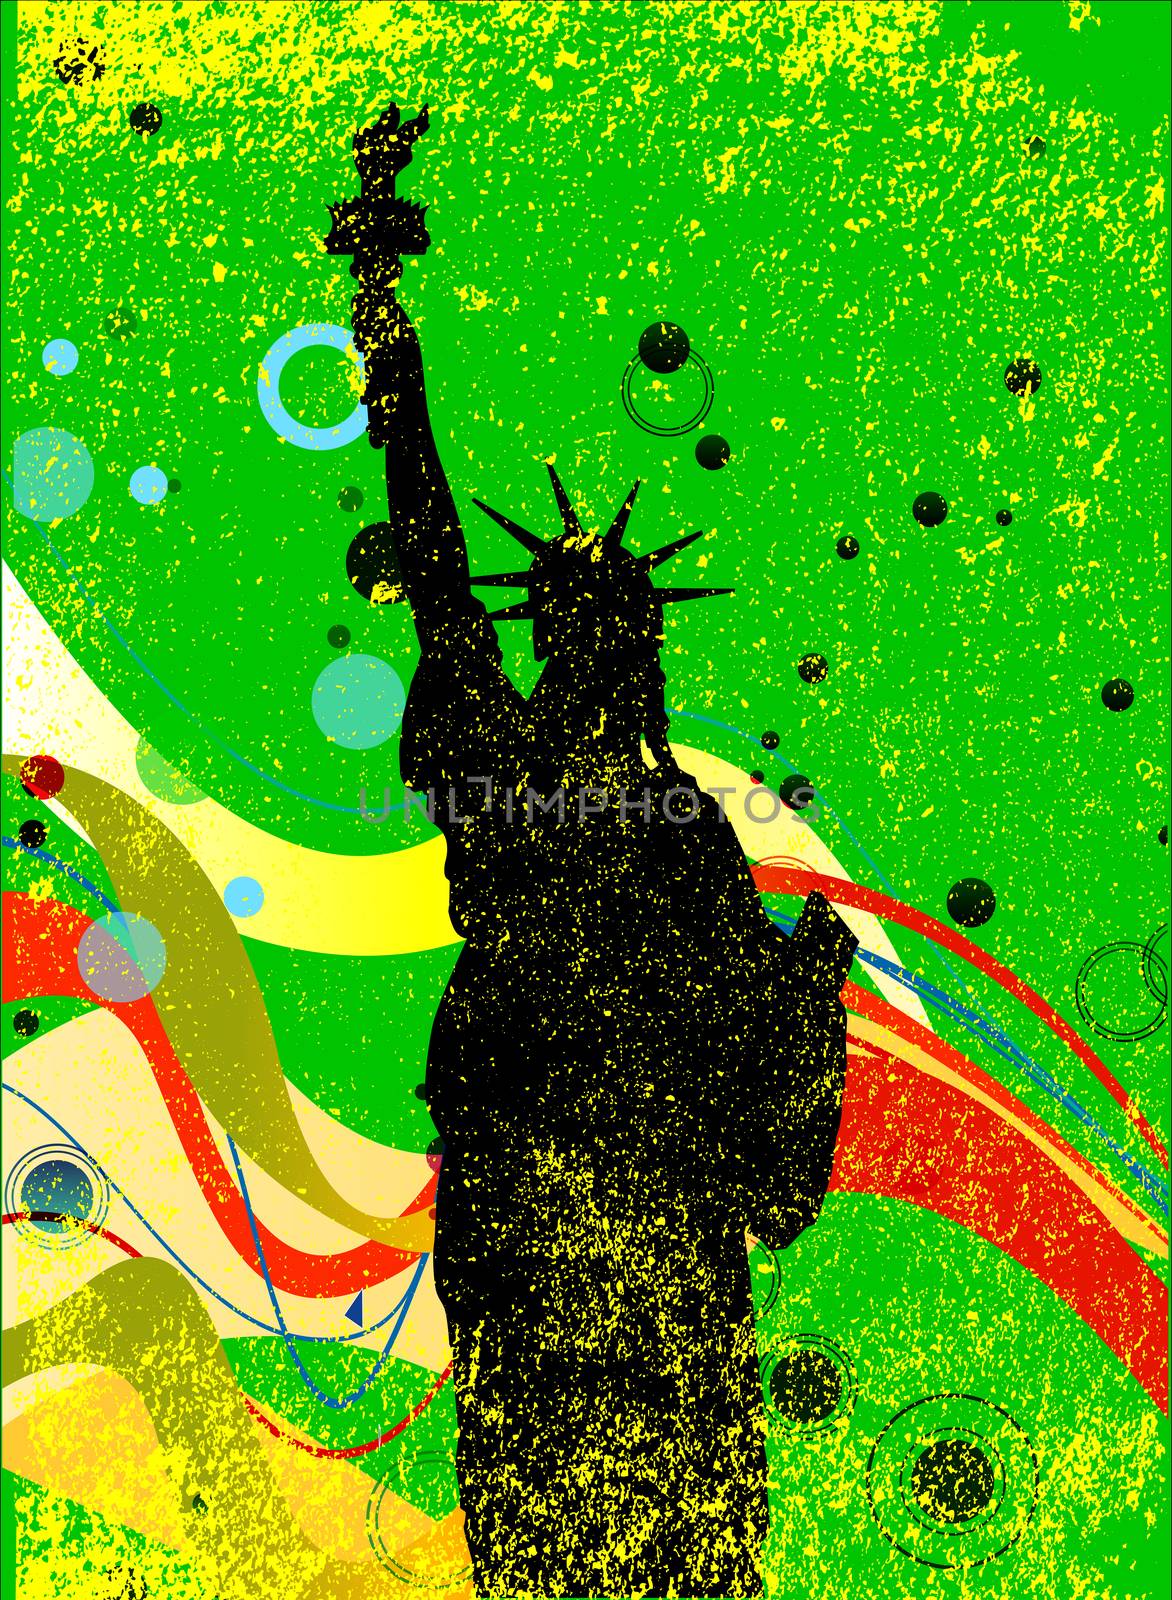 The United States Statue Of Liberty in silhouette into a jazz style grunge background